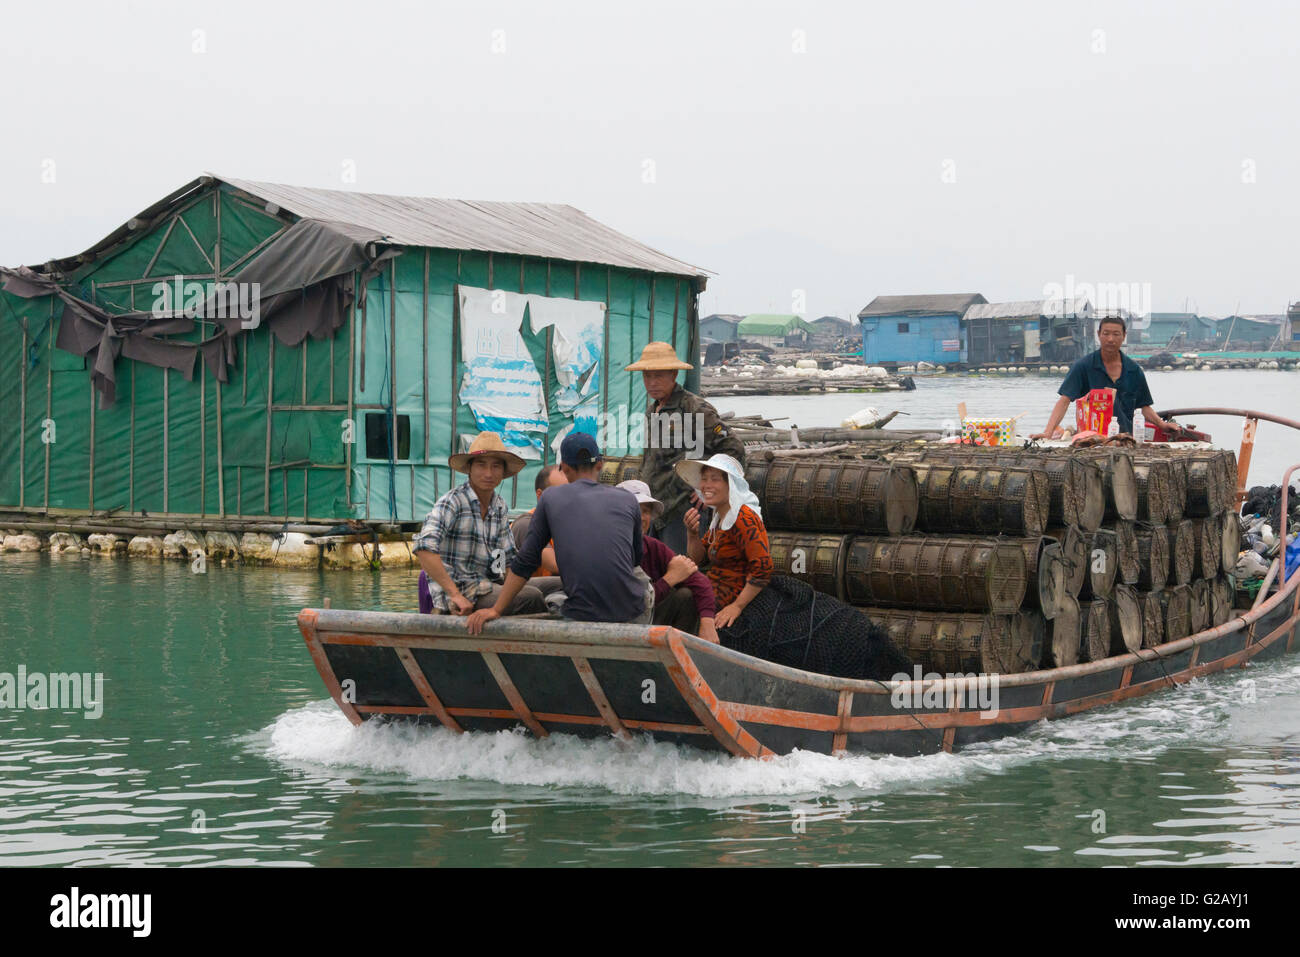 Fishing boat carrying shrimp cages and floating village along the coast of East China Sea, Xiapu, Fujian Province, China Stock Photo